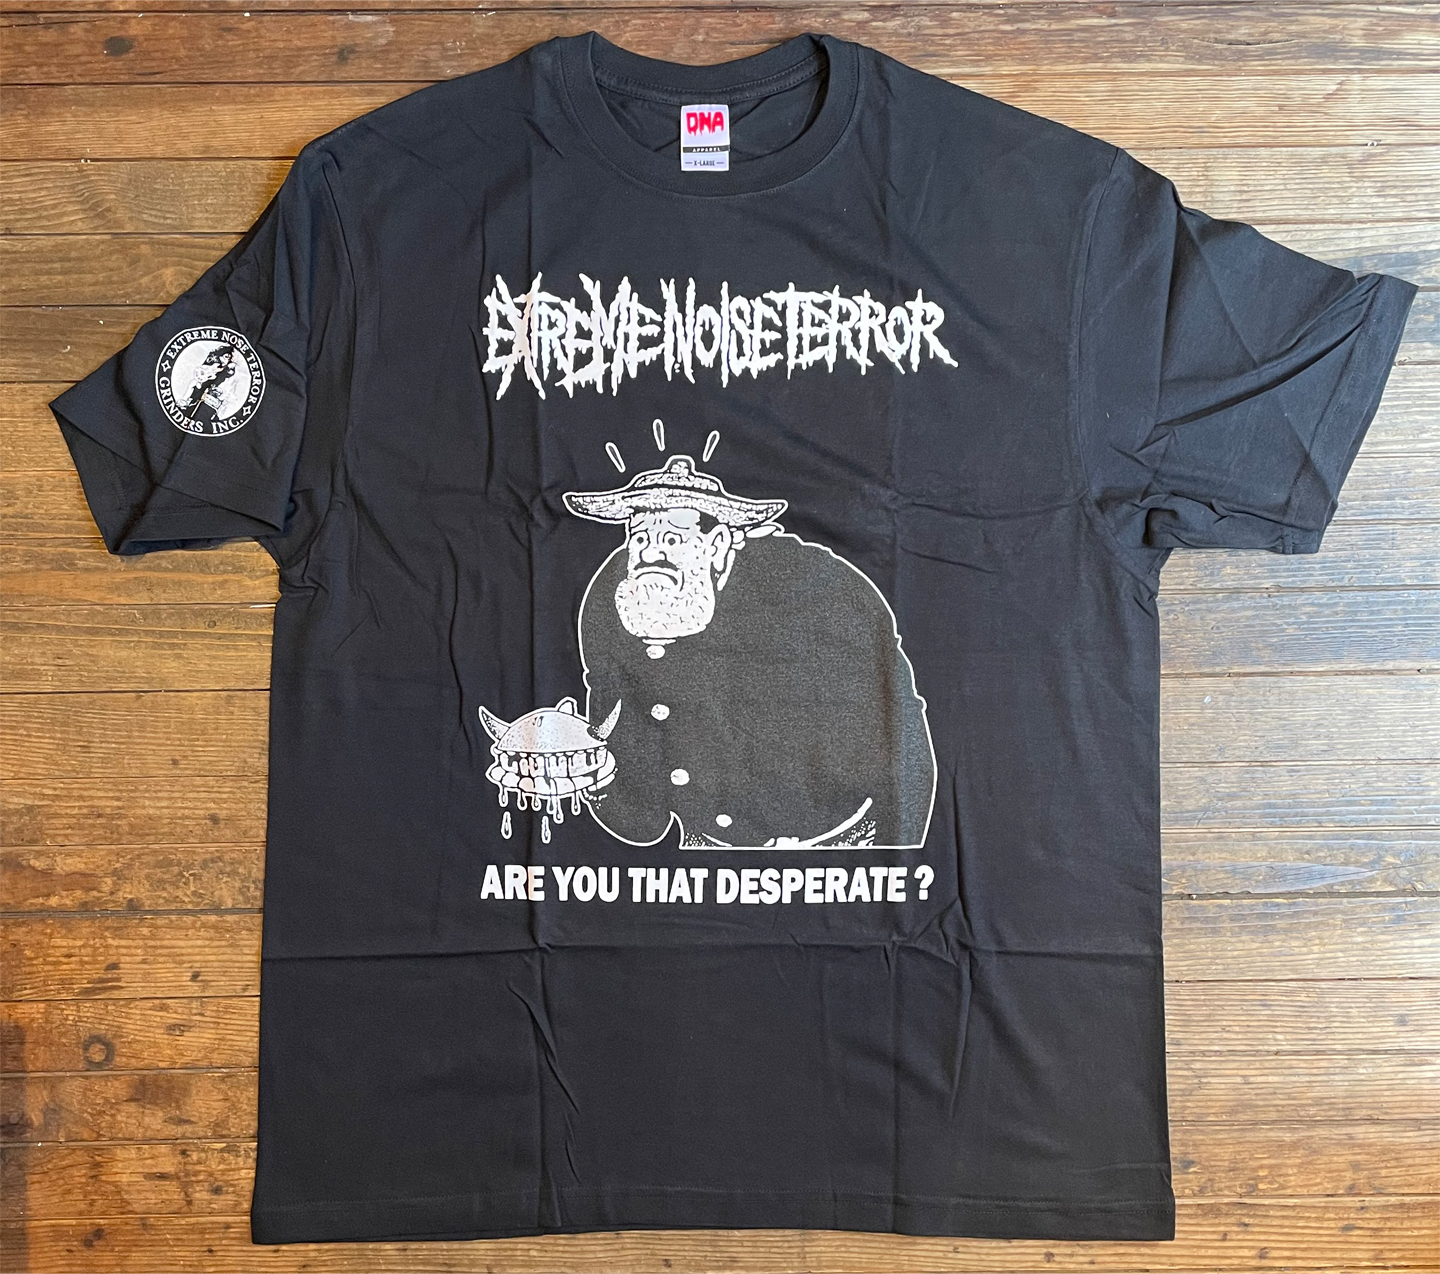 EXTREME NOISE TERROR Tシャツ ARE YOU THAT DESPERATE? オフィシャル